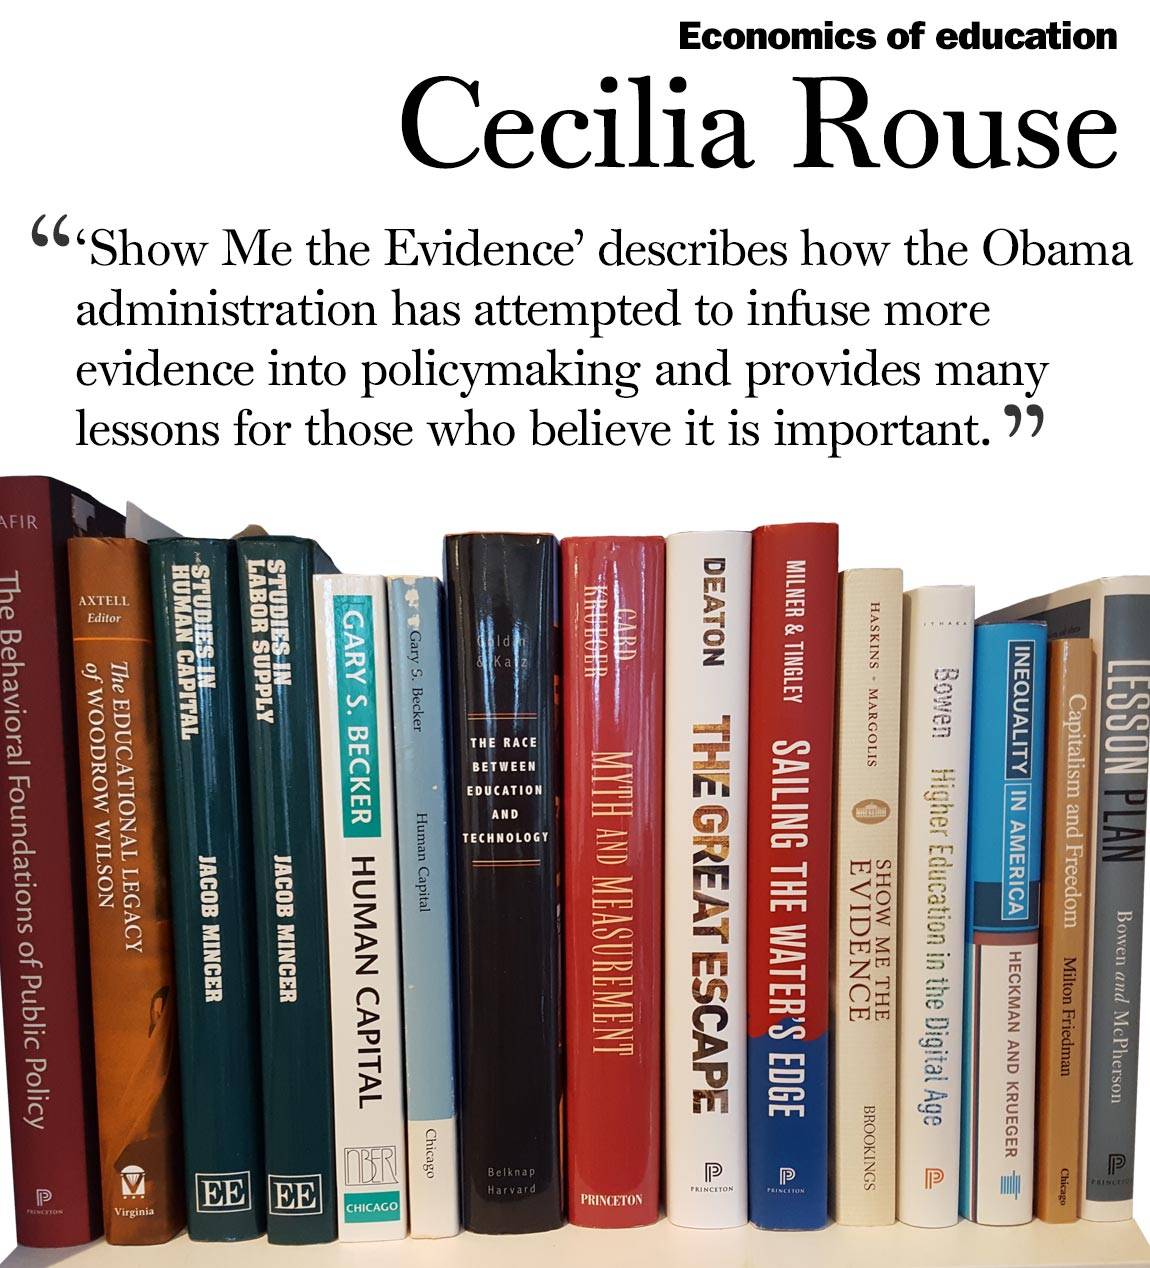 Faculty Bookshelves 2016 “Economics of education; Cecilia Rouse; ‘‘Show Me the Evidence’ describes how the Obama administration has attempted to infuse more evidence into policymaking and provides many lessons for those who believe it is important. ‘“